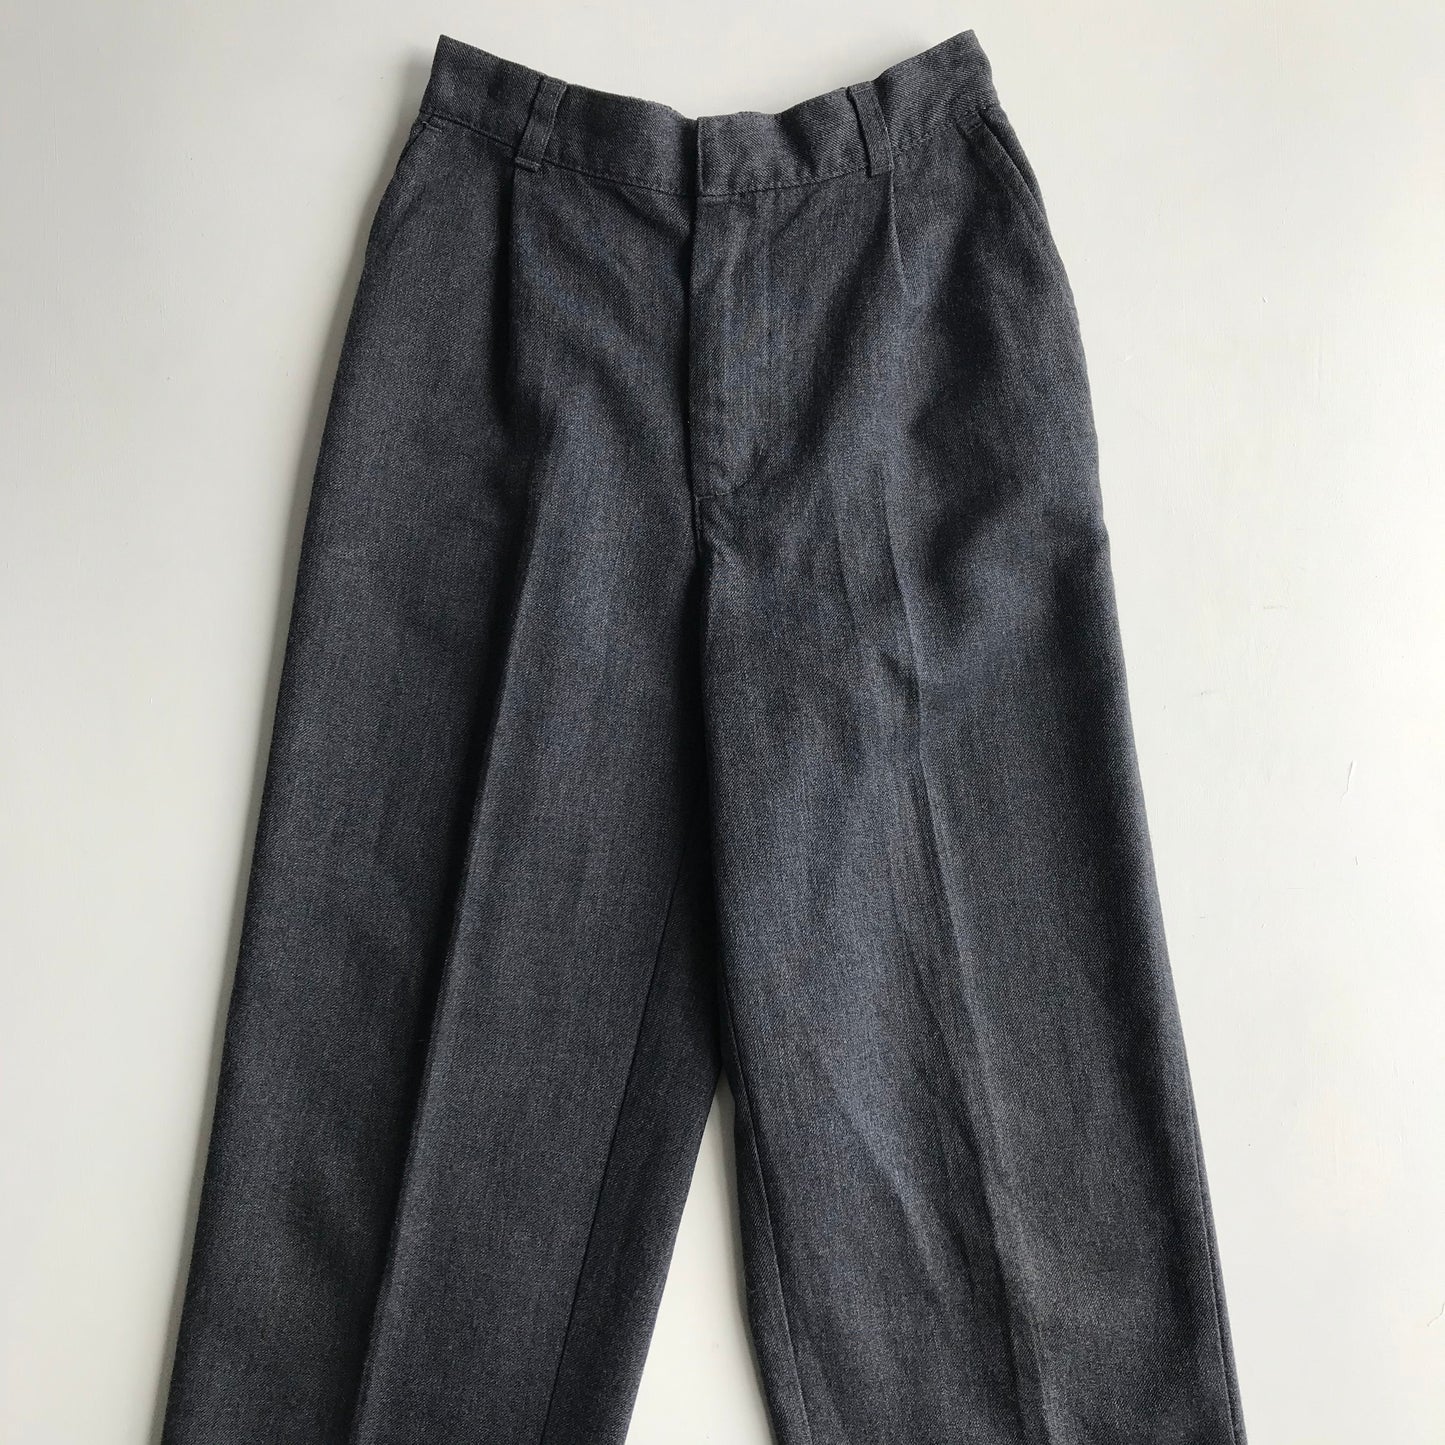 Grey School Trousers with Elasticated Waist